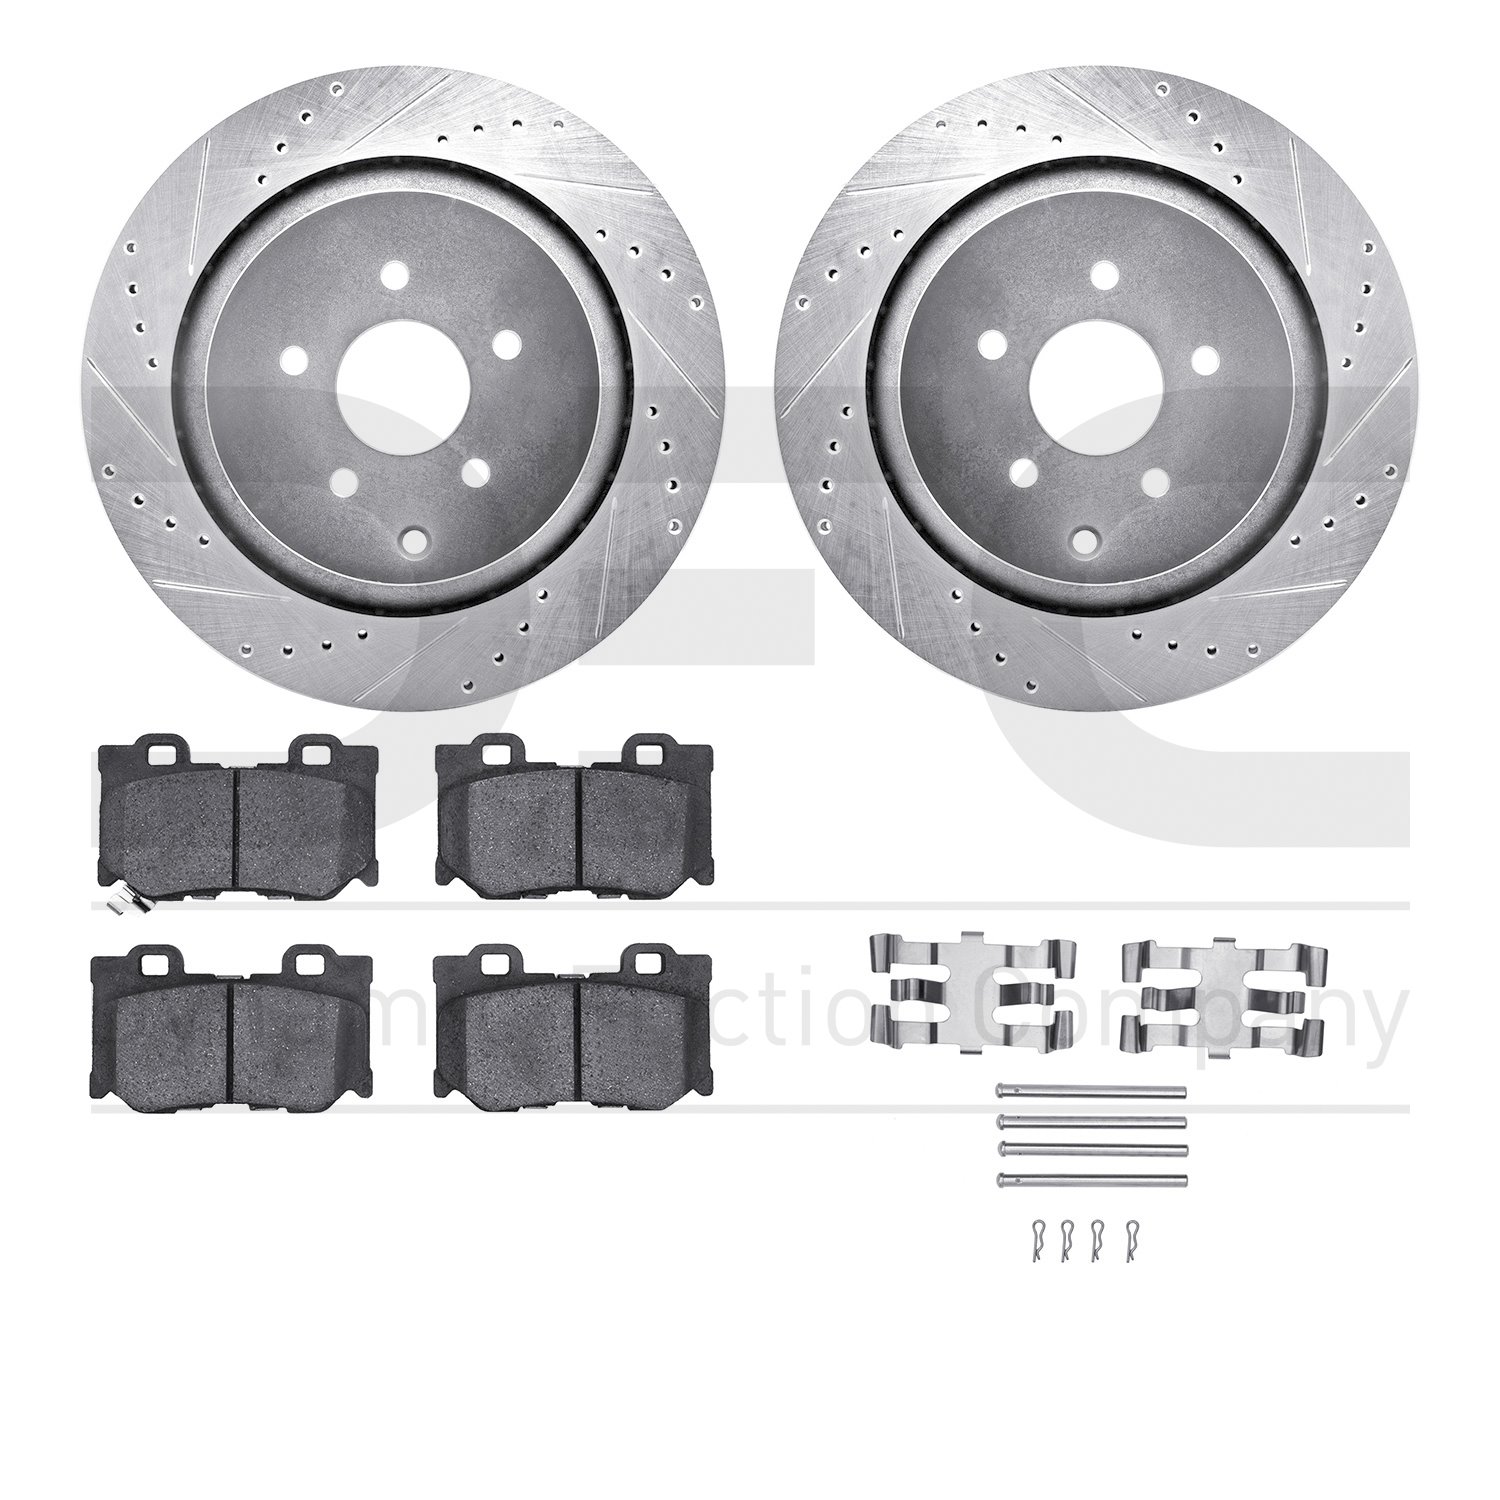 7512-68017 Drilled/Slotted Brake Rotors w/5000 Advanced Brake Pads Kit & Hardware [Silver], Fits Select Infiniti/Nissan, Positio